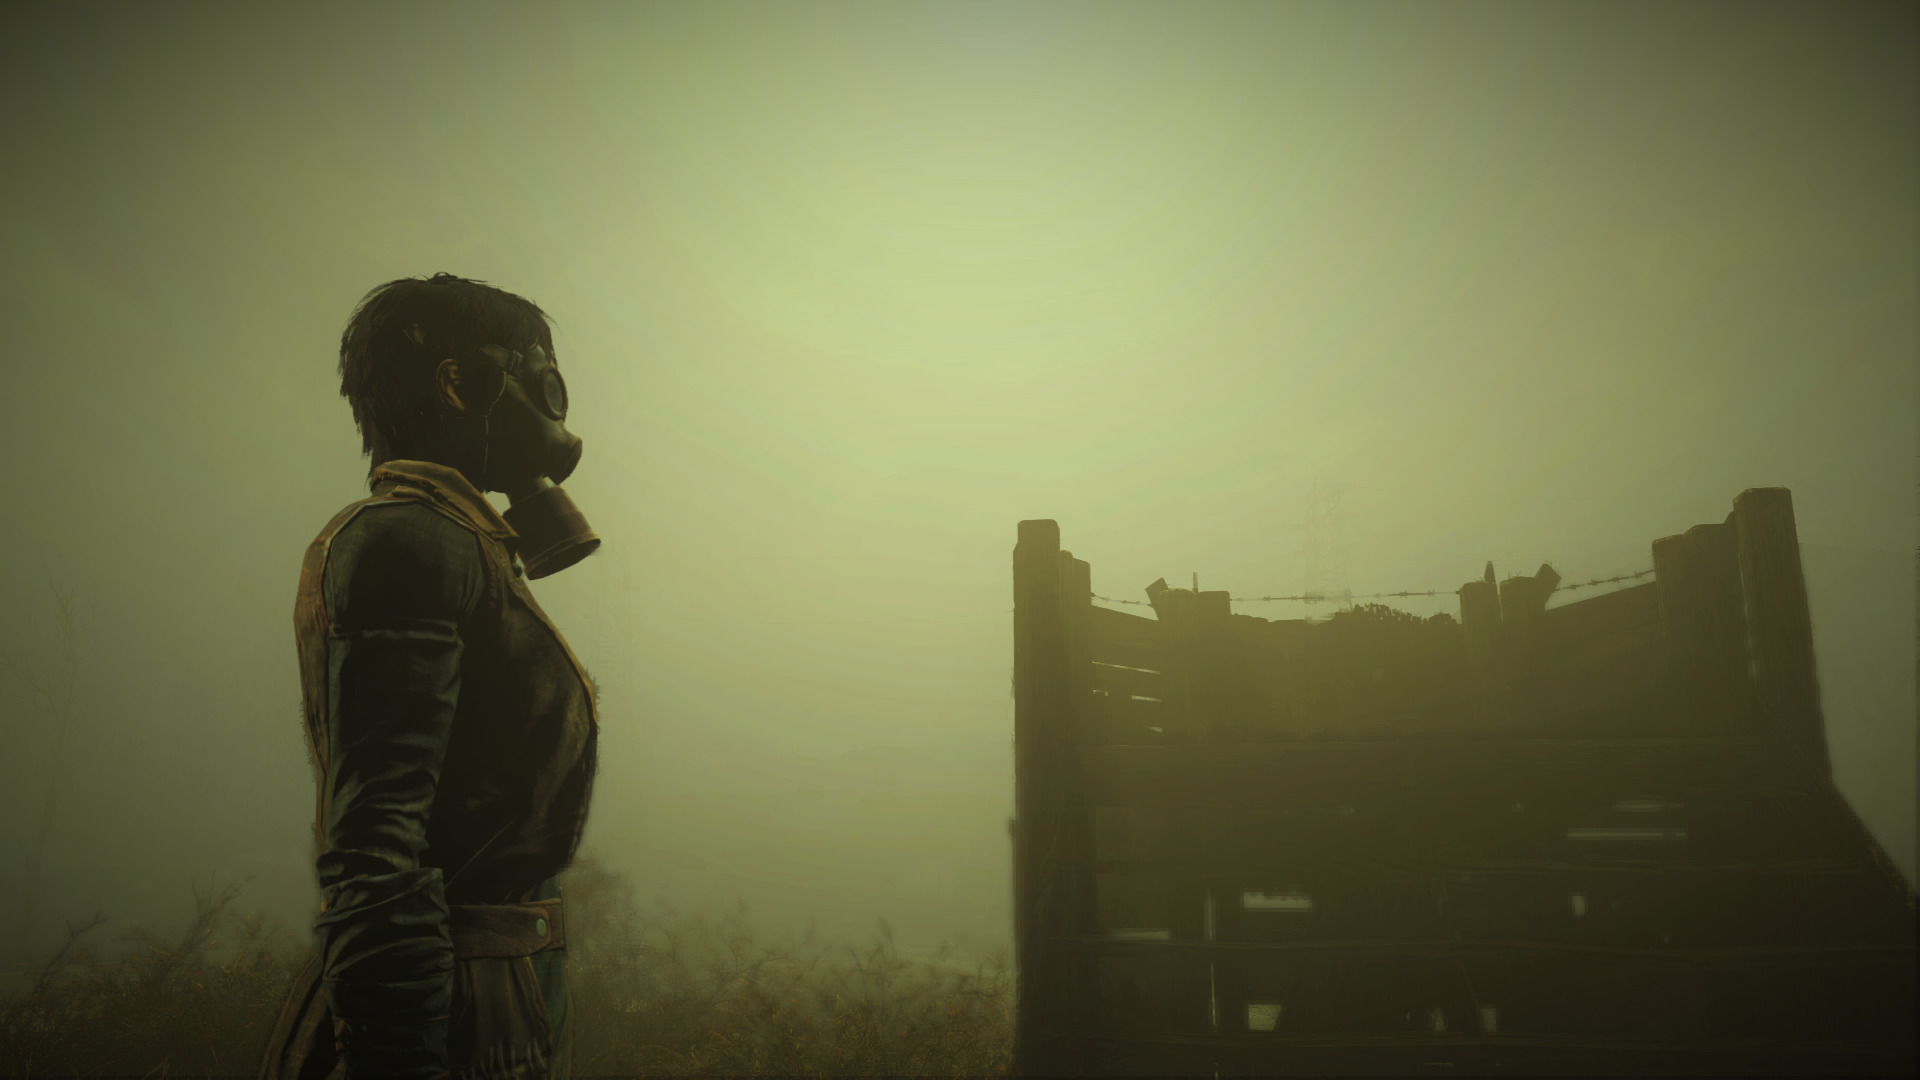 Fallout, Fallout 4, Wasteland, Apocalyptic, Nuclear, Gas masks Wallpaper